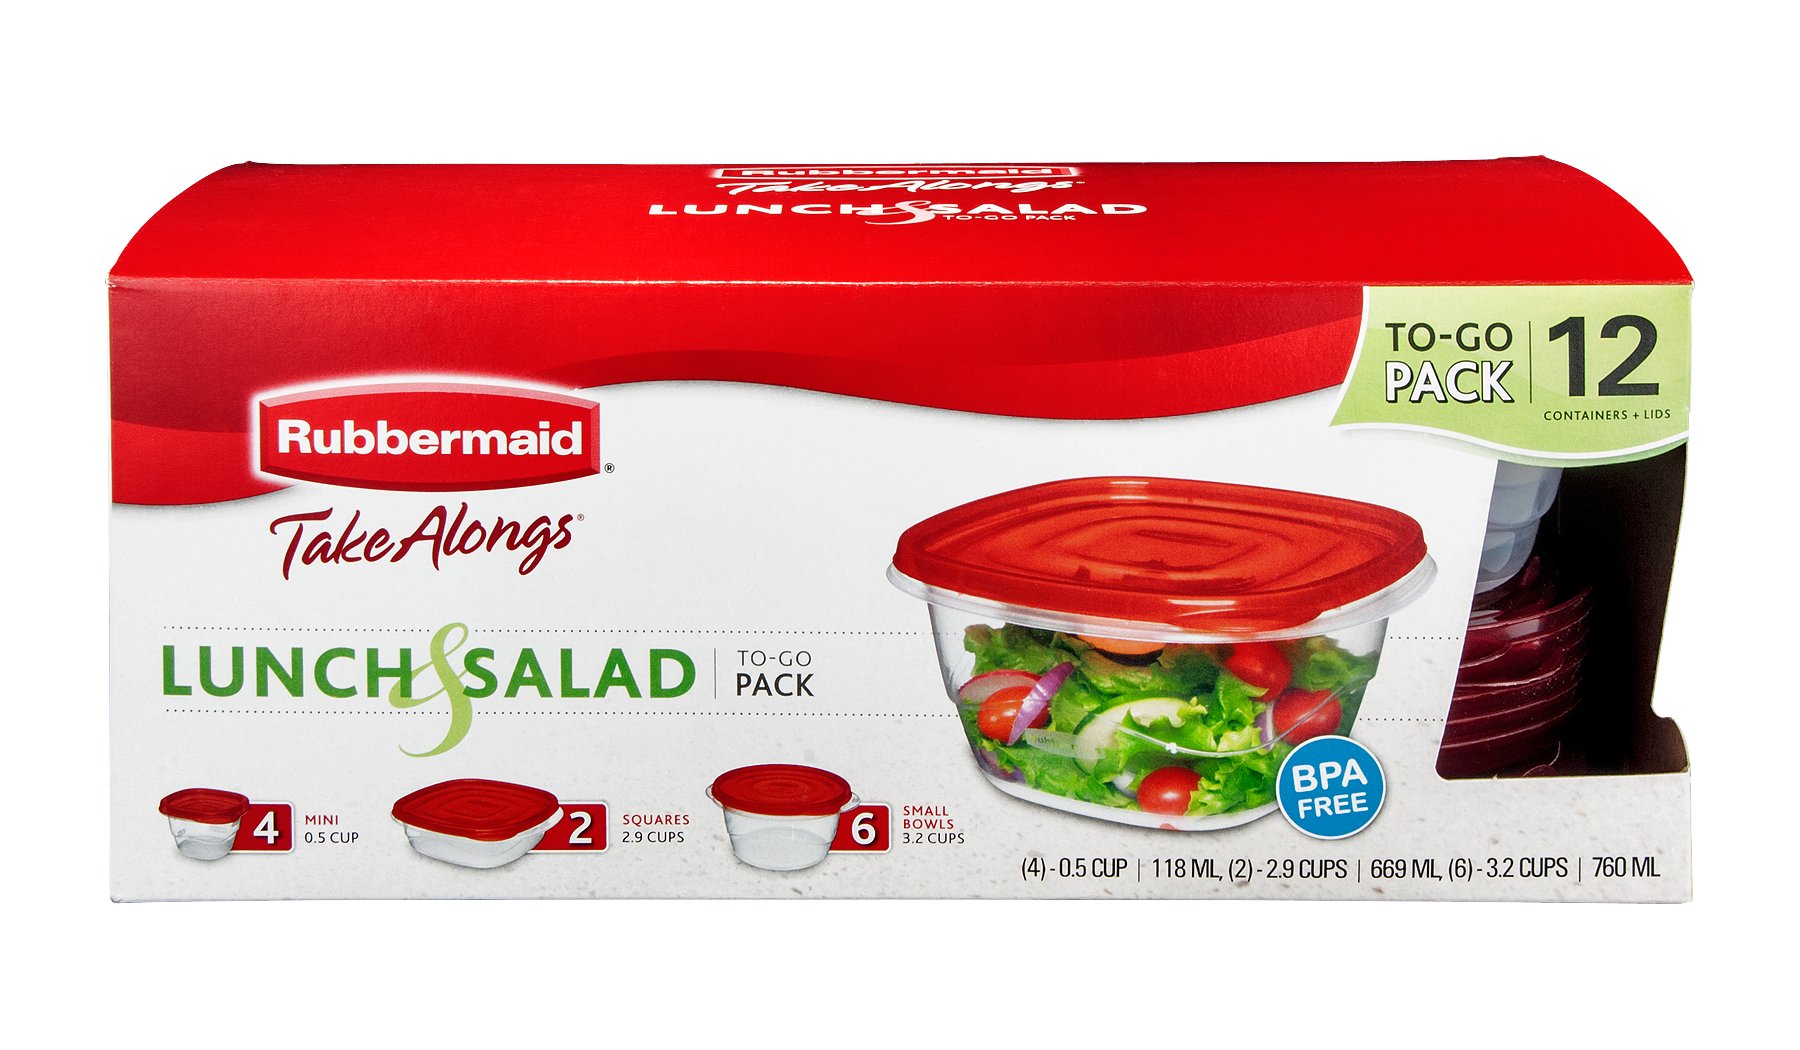 Rubbermaid Take Alongs Lunch & Salad To-Go Pack - Shop Food